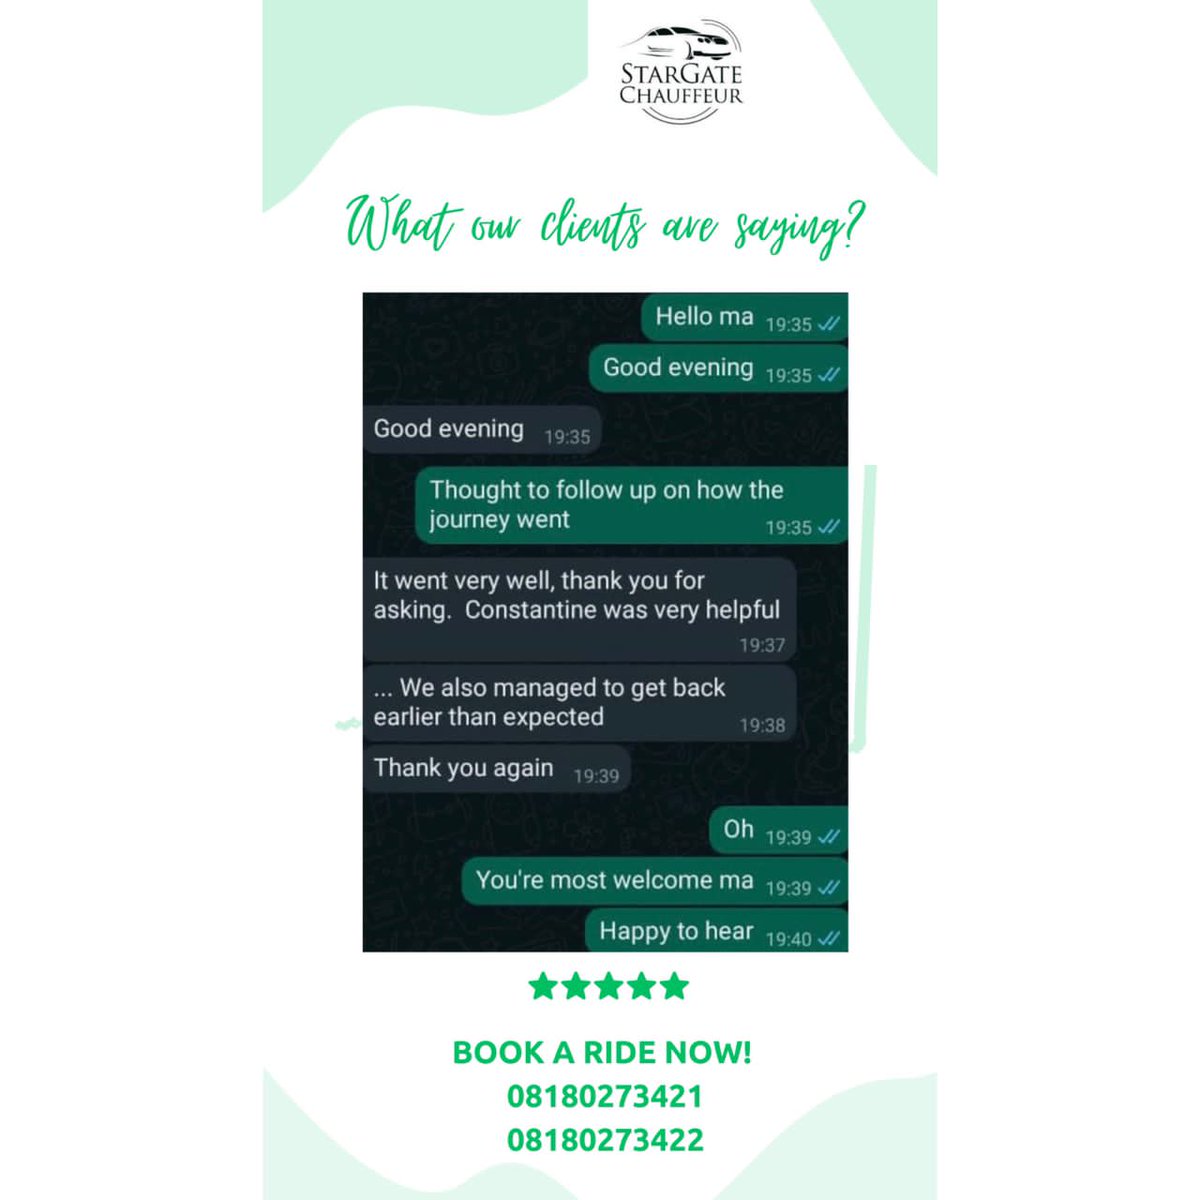 We don’t just offer a seamless service. We also ensure your satisfaction with our service. 💯 
Book a ride with us today! 
Send a DM or Call/whatsapp
08180273421
08180273422

Firstlady God is Good #finalbbb23 #stargatechauffeur #UAAPSeason85 #reviews #luxurylife #TheFlashMovie